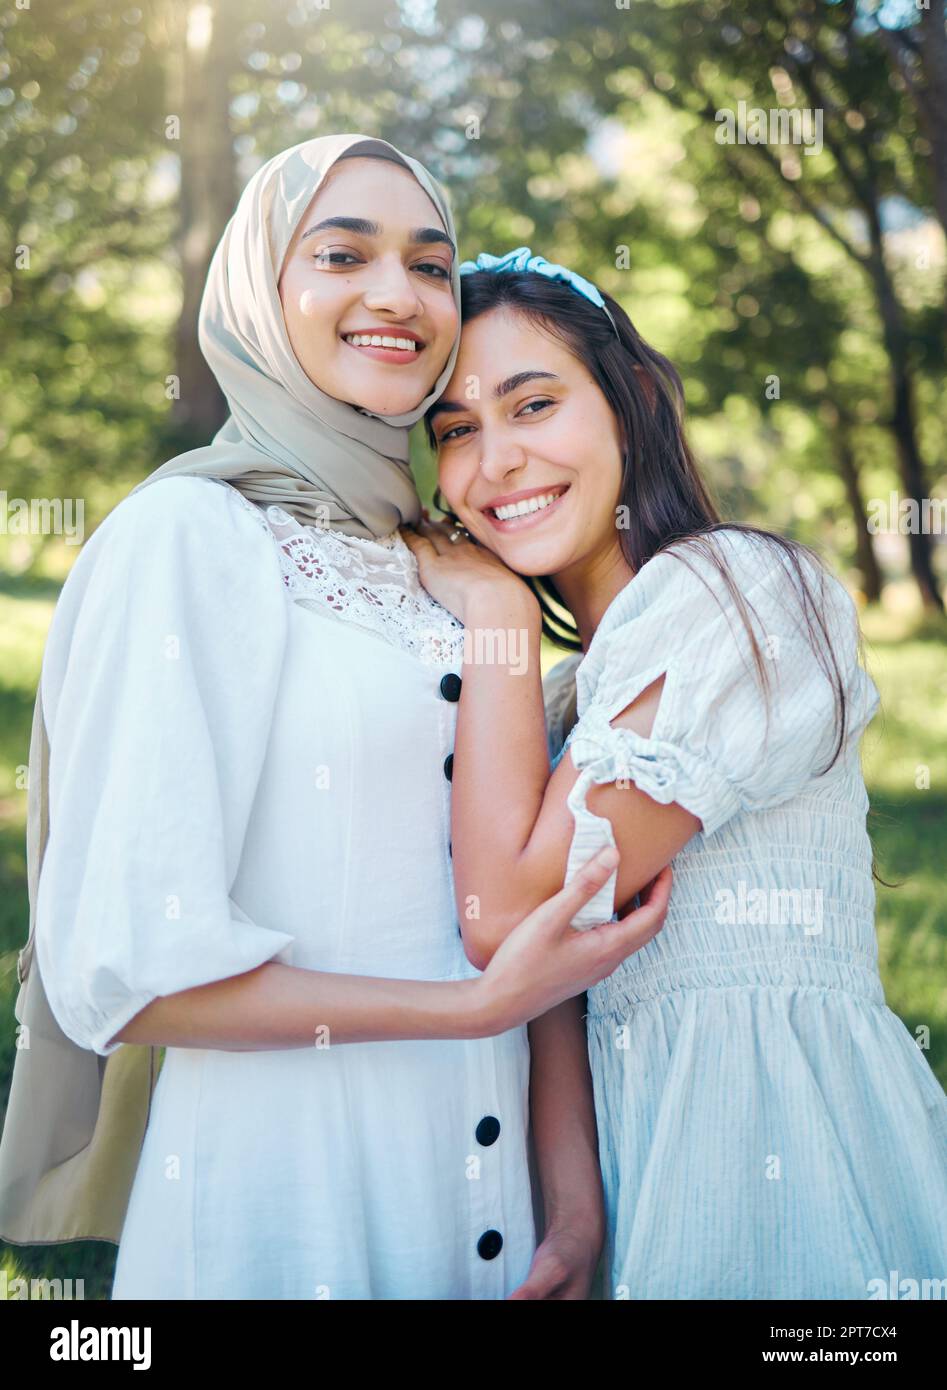 Women happy in garden, forest park with trees and outdoor garden picnic in multicultural summer fashion. Portrait of female friends together, muslim g Stock Photo